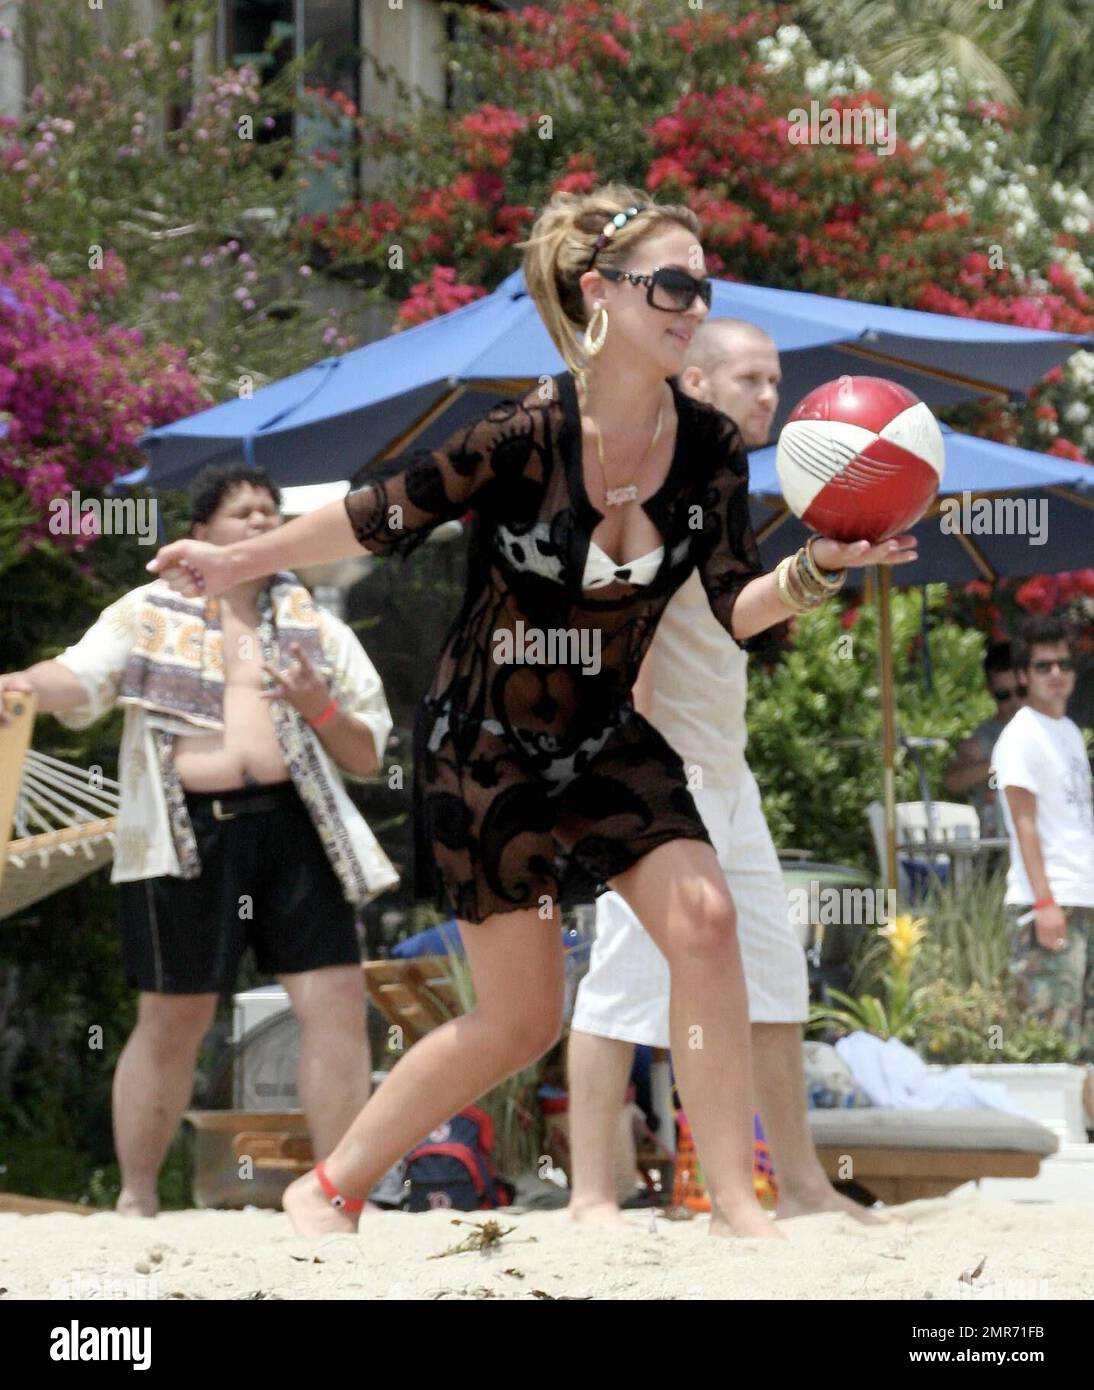 Haylie Duff  celebrates Independence Day with her sister, Hilary, at a beach house in Malibu, Calif. 7/4/07. Stock Photo